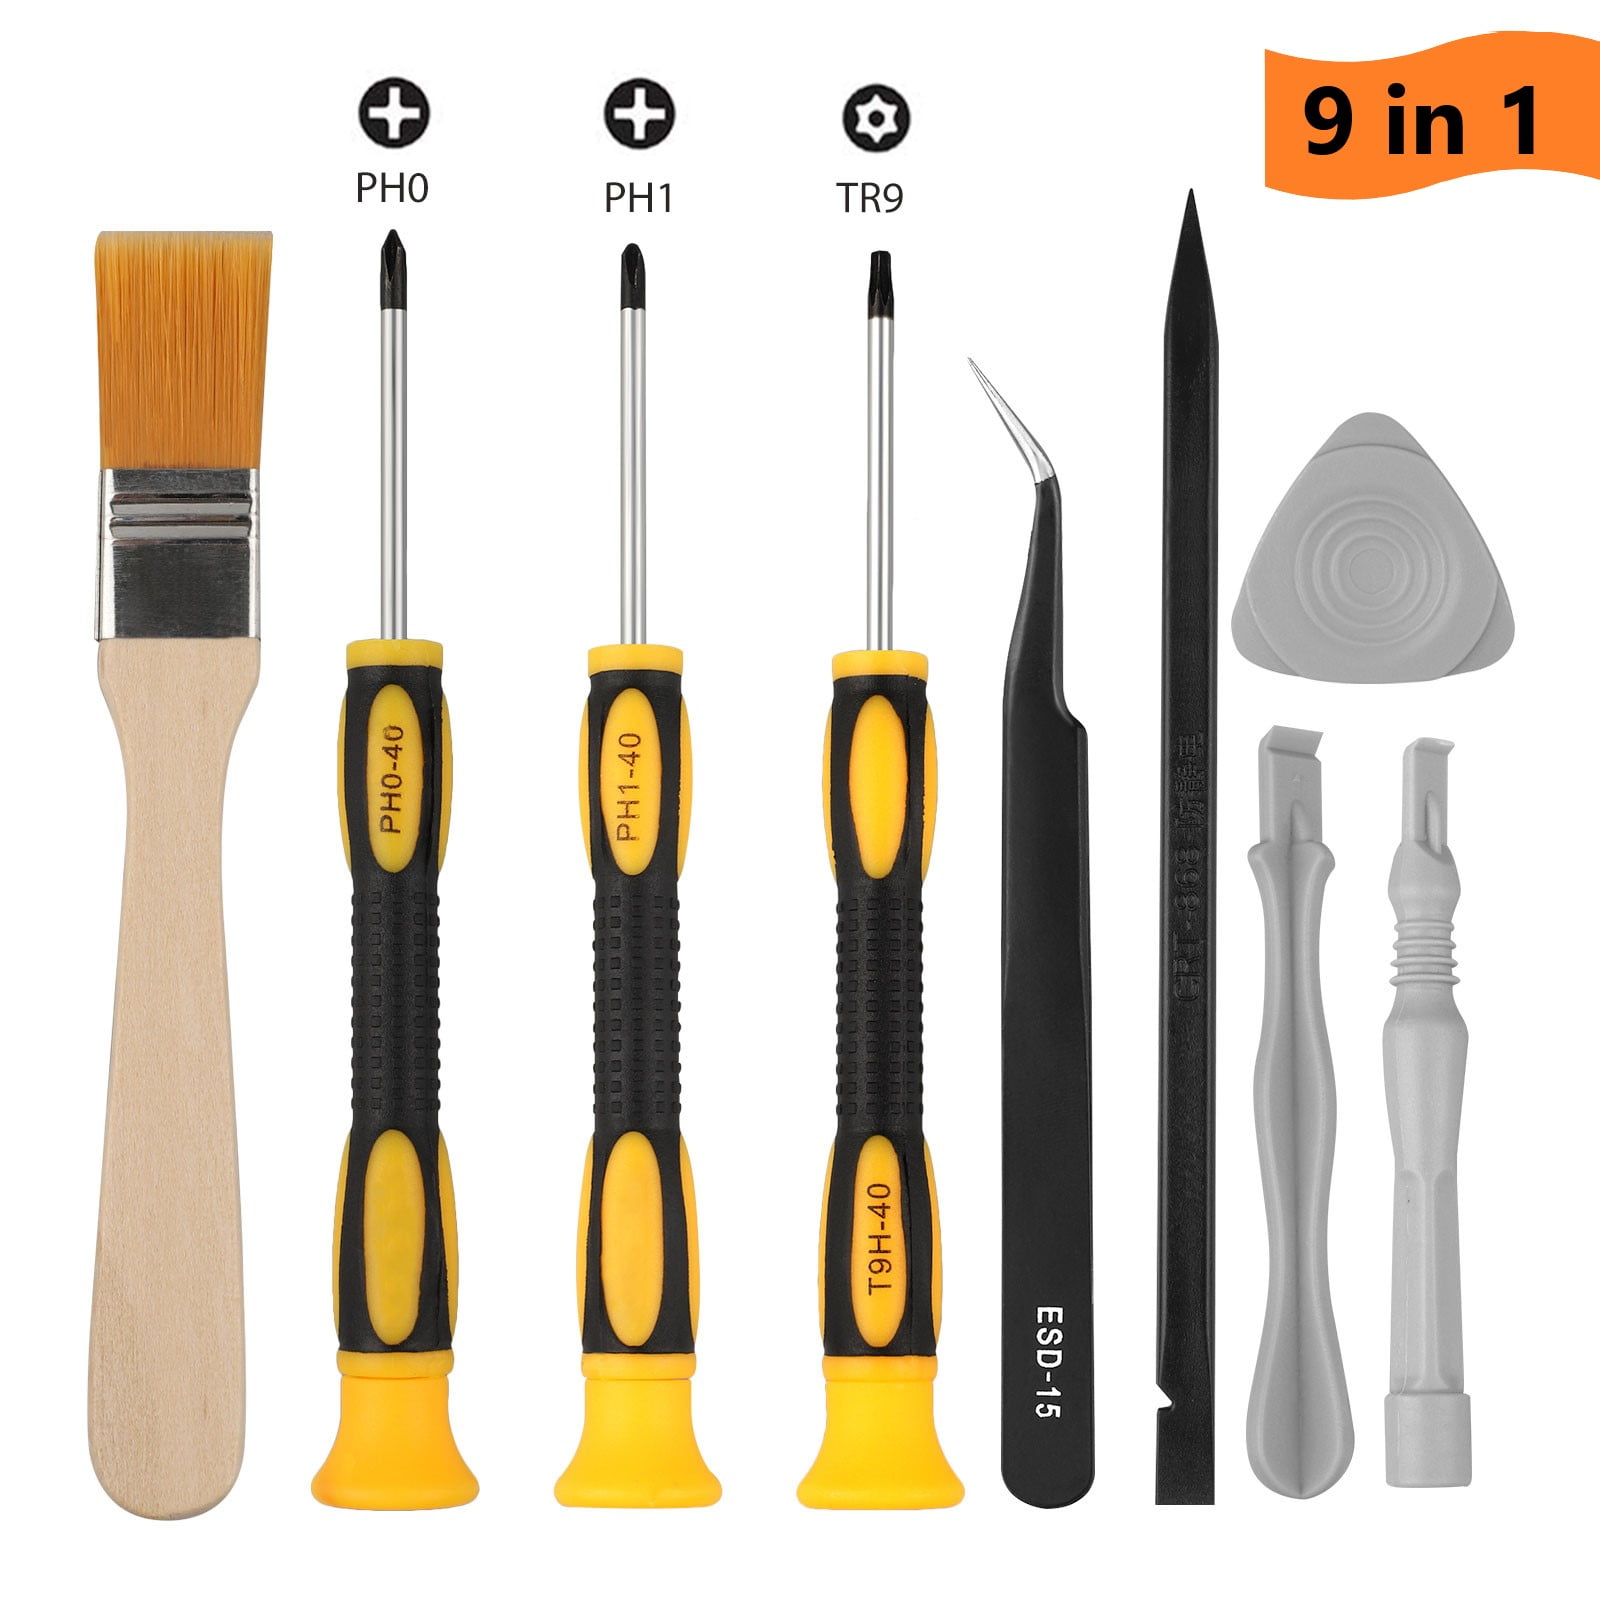 Uredelighed Dødelig Kanon EEEkit Complete Screwdriver Set Repair Cleaning Tool Kit Fit for Sony PlayStation  4, Security Torx Screwdriver T9 (TR9) Phillips PH0 PH1 for for Xbox  One/Xbox 360, Sony PS3/PS4 Controller/Console - Walmart.com